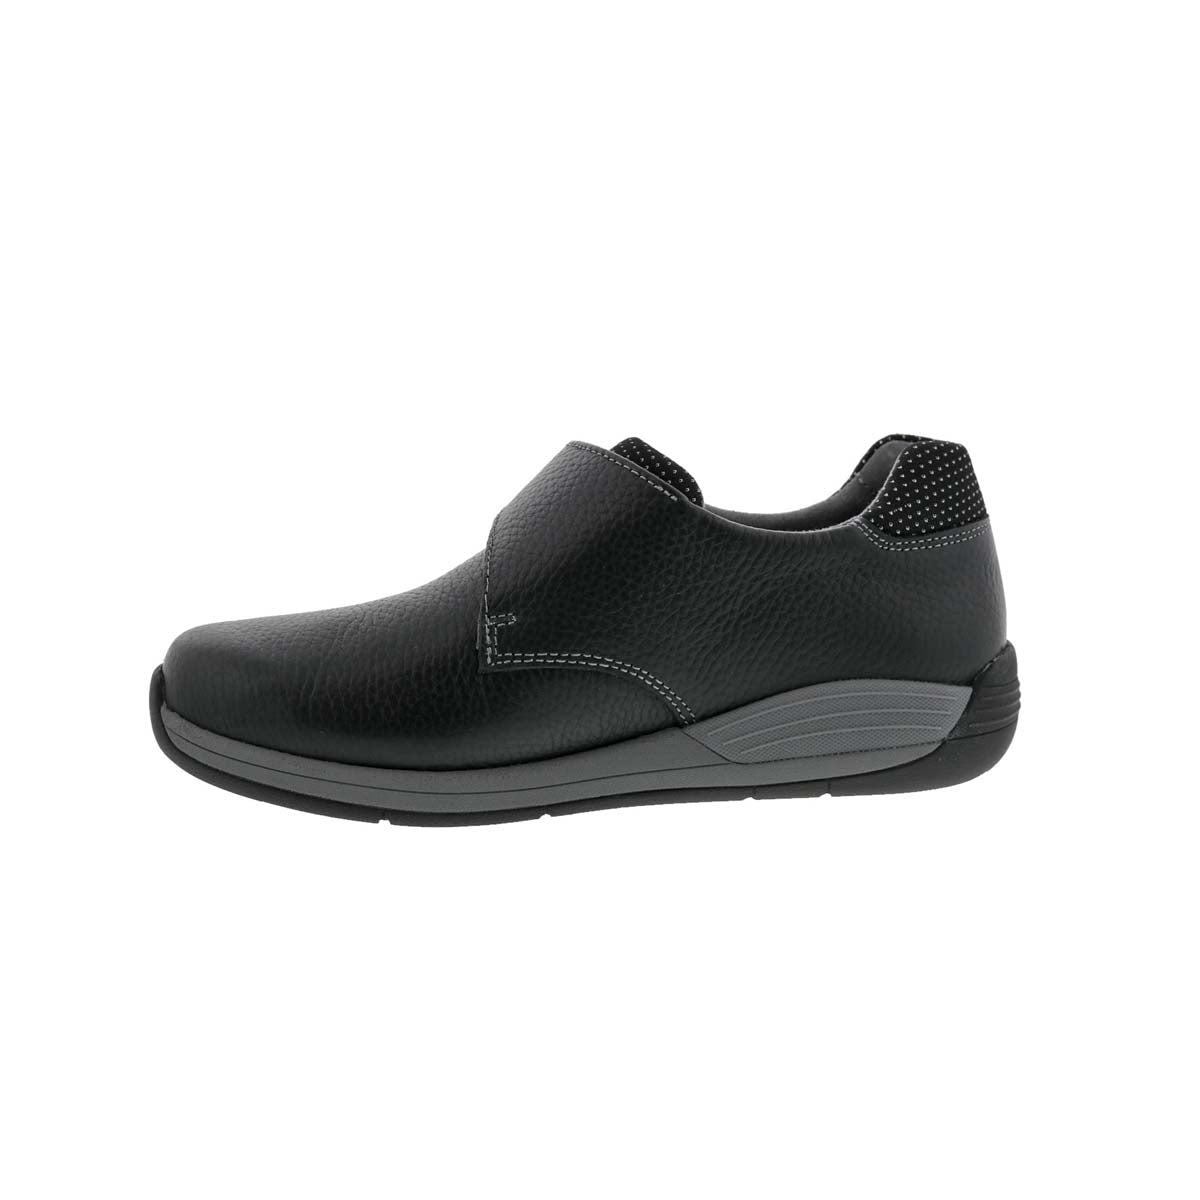 DREW TEMPO WOMEN ADJUSTABLE CLOSURE SLIP-ON SHOES IN BLACK LEATHER - TLW Shoes